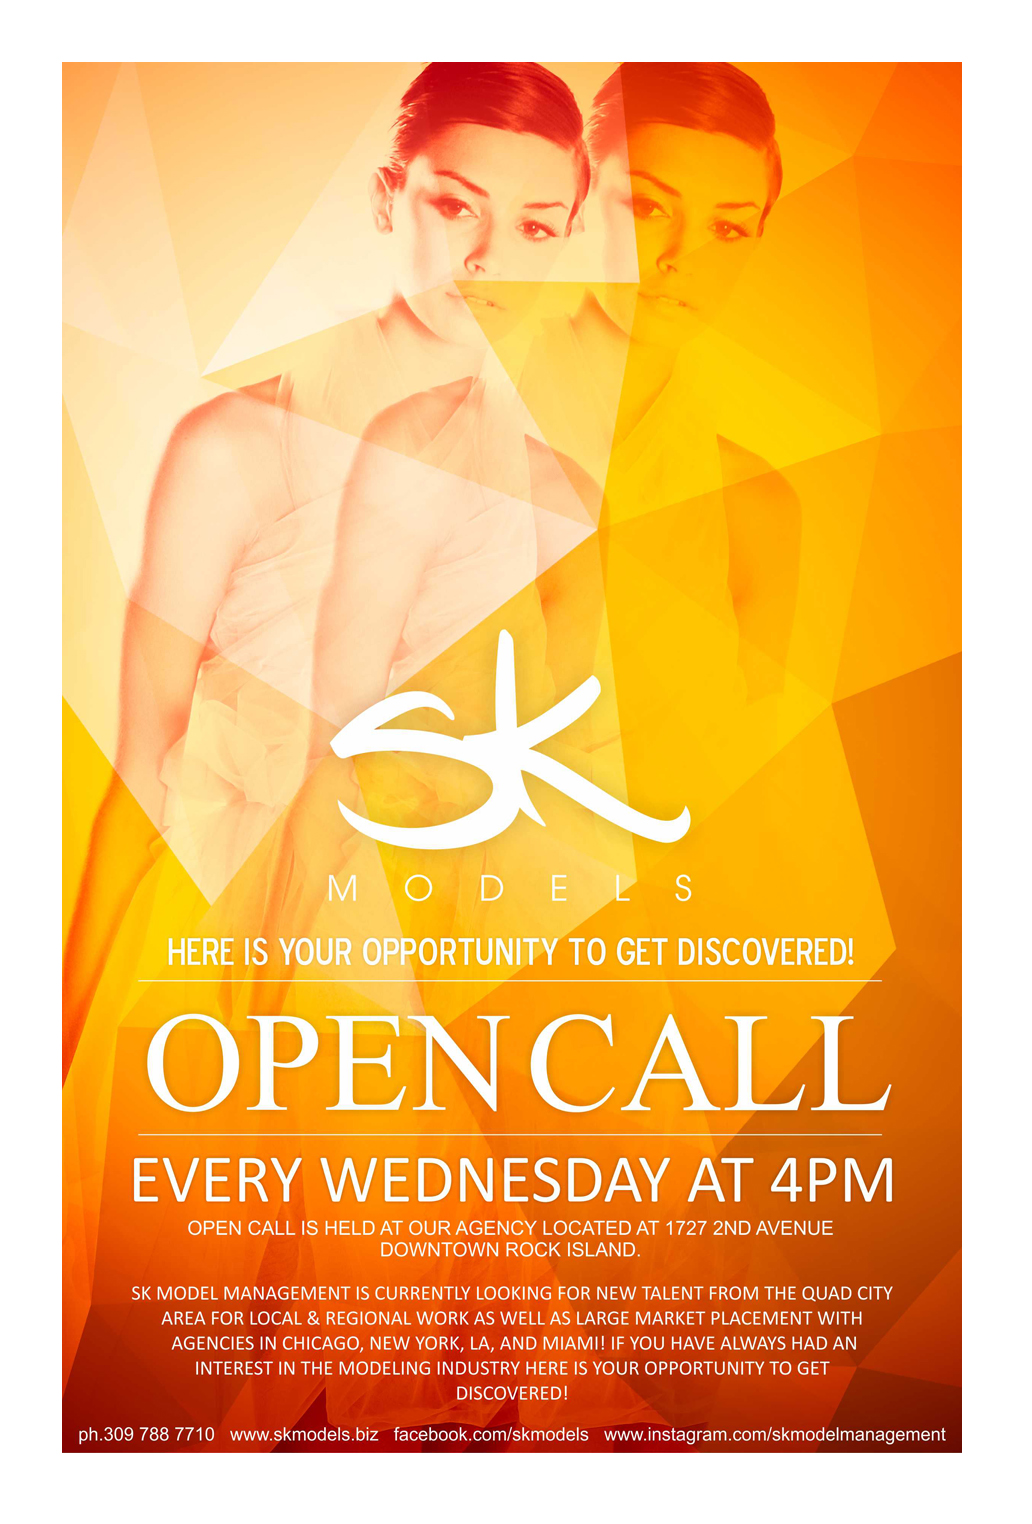 SK Models: Here is your opportunity to get discovered! Open call every Wednesday at 4pm. Open call is held at our agency located at 1727 2nd Avenue Downtown Rock Island